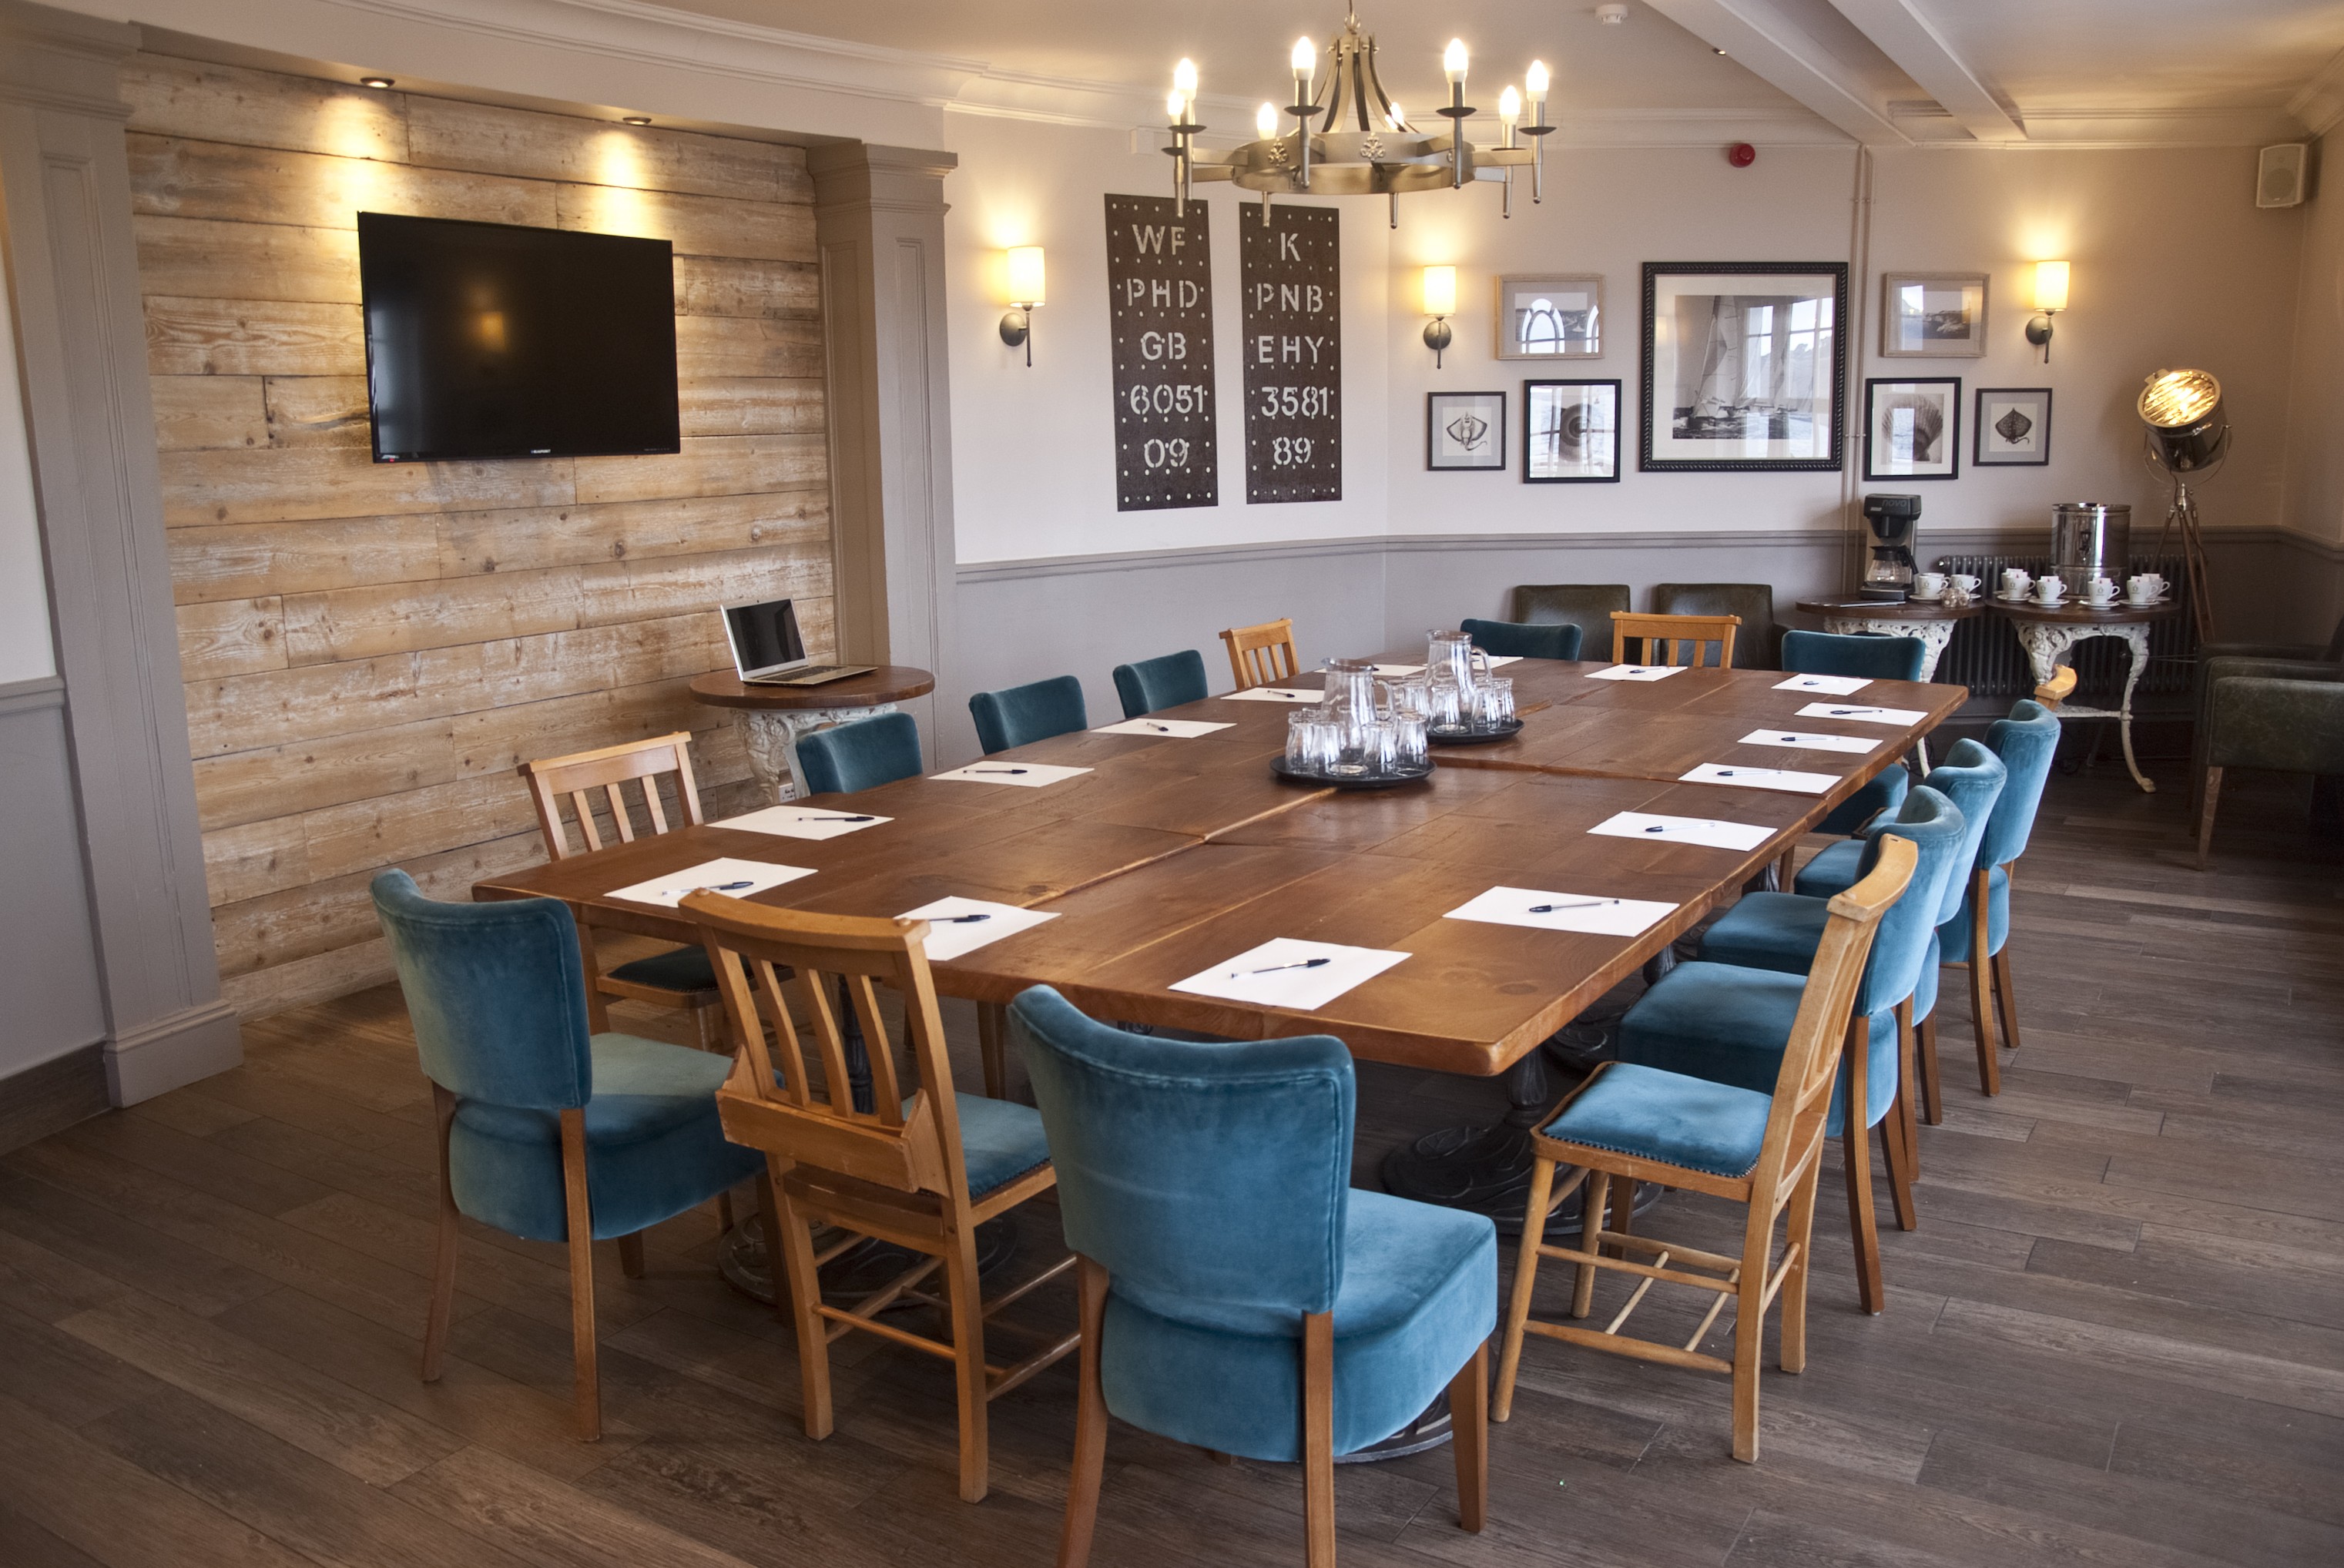 The Function Room Room at The Waterfront Pub & Dining